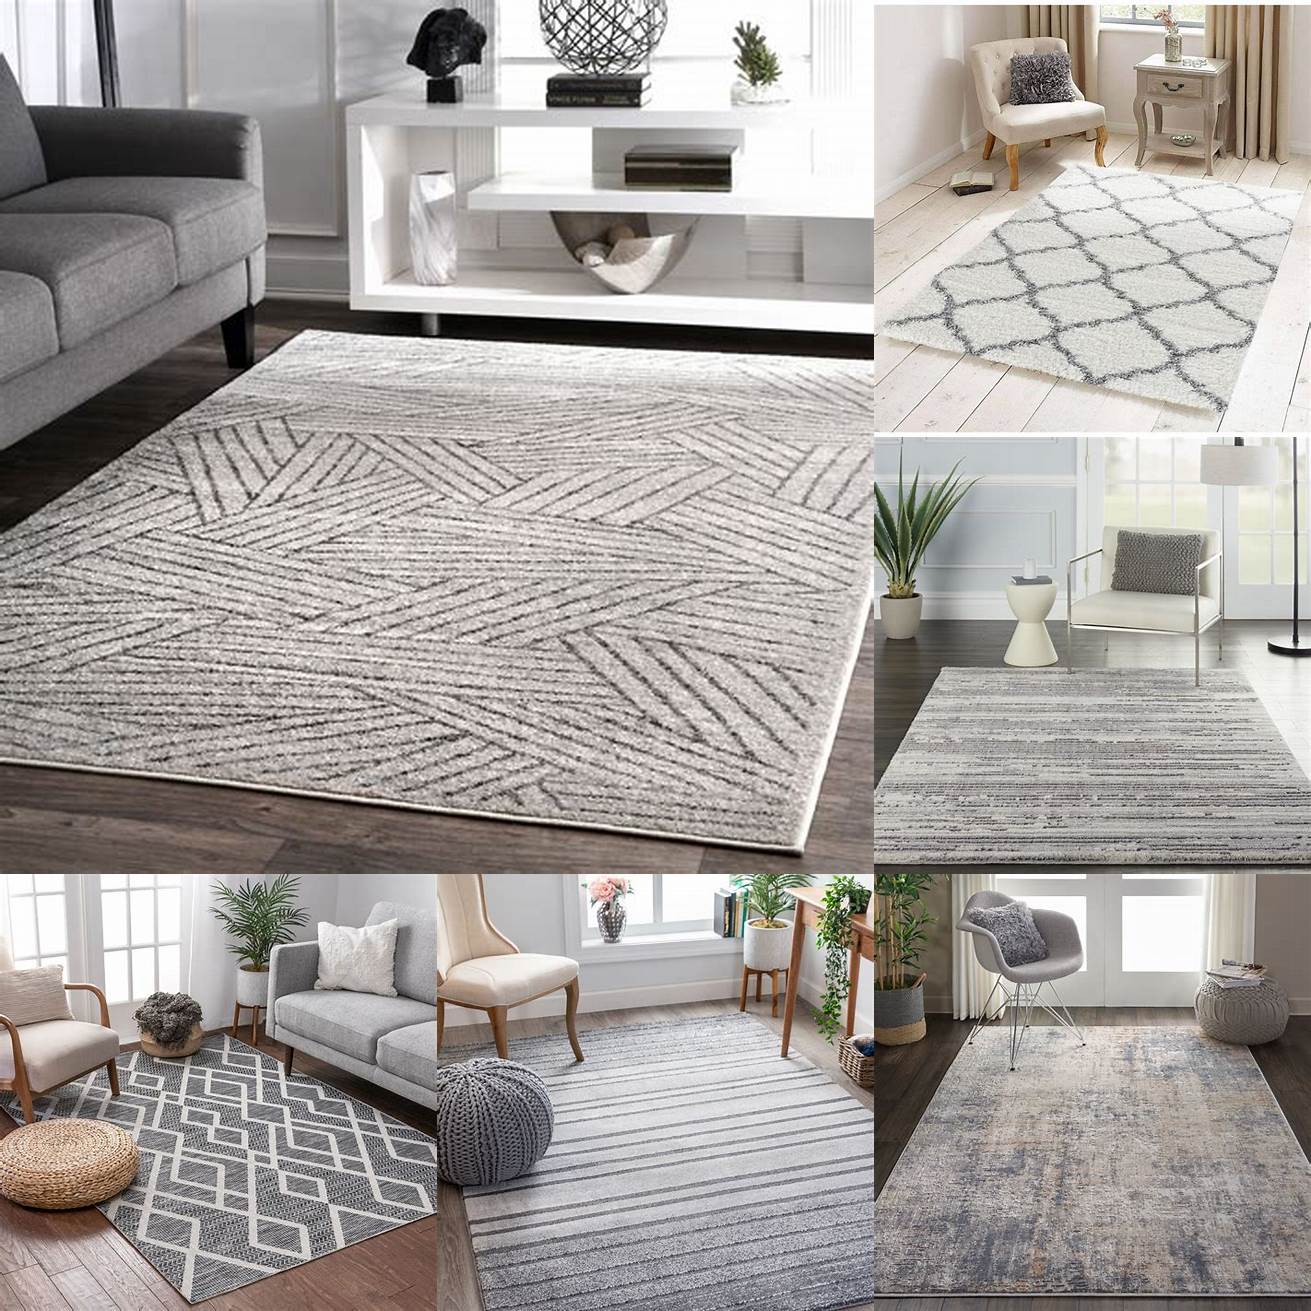 Grey and white patterned rug